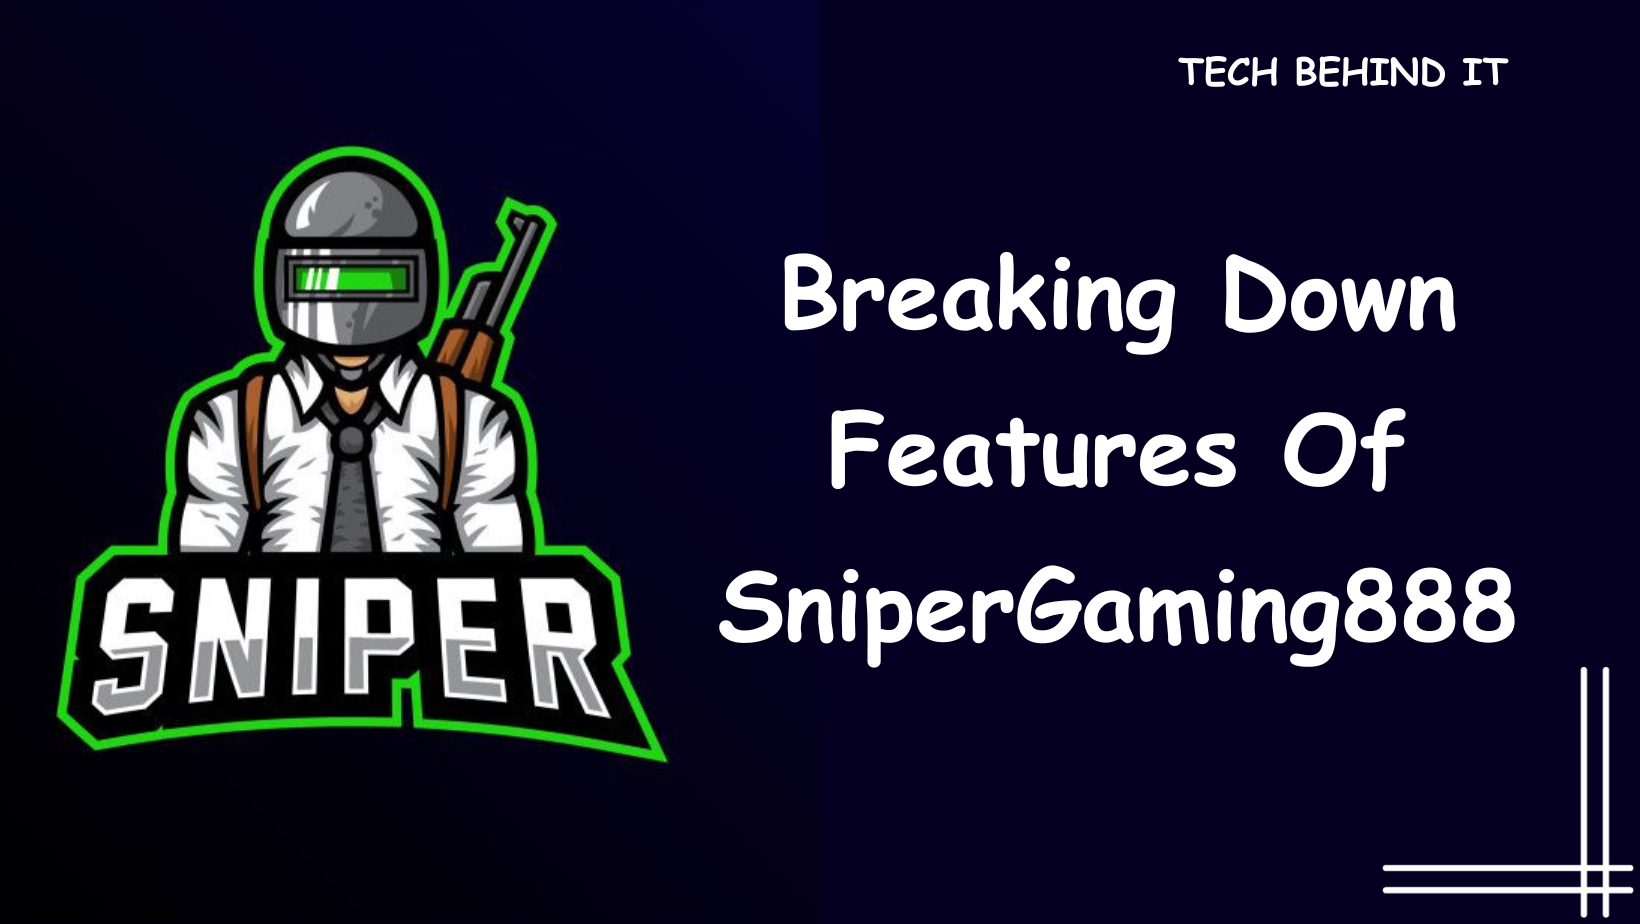 Breaking Down Features Of SniperGaming888